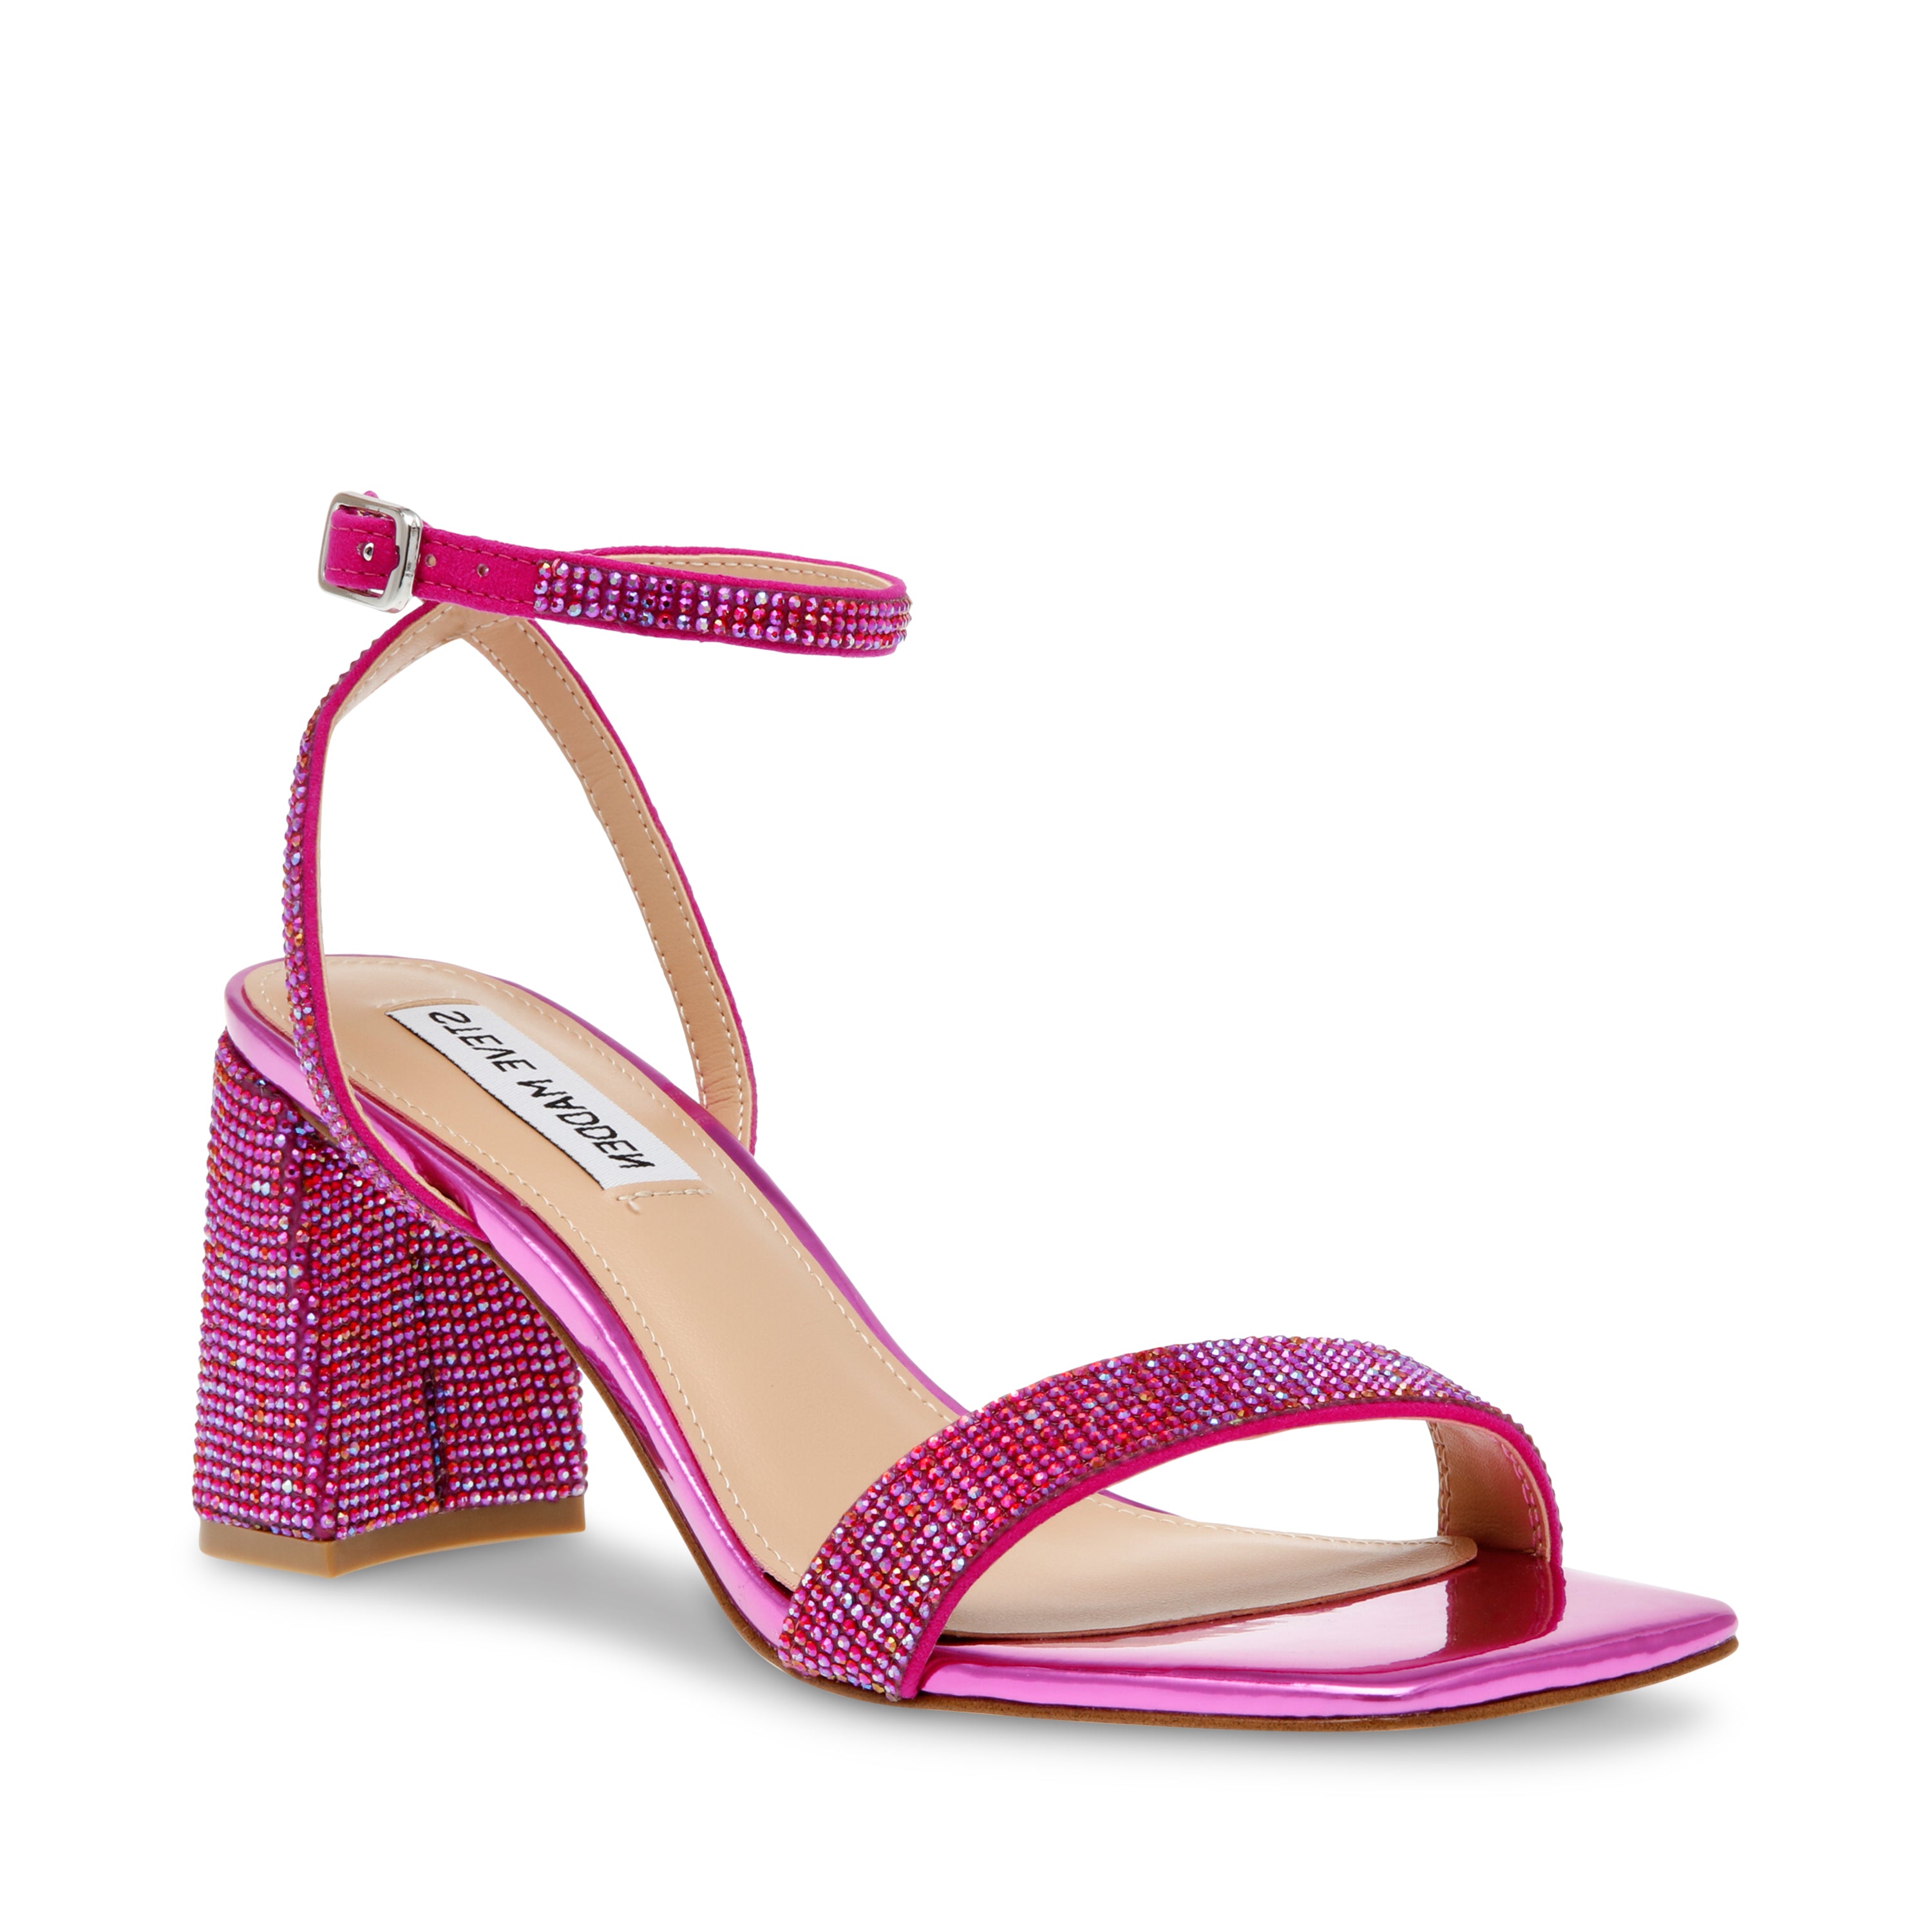 Luxe-R Sandal Pink Iridescent- Hover Image